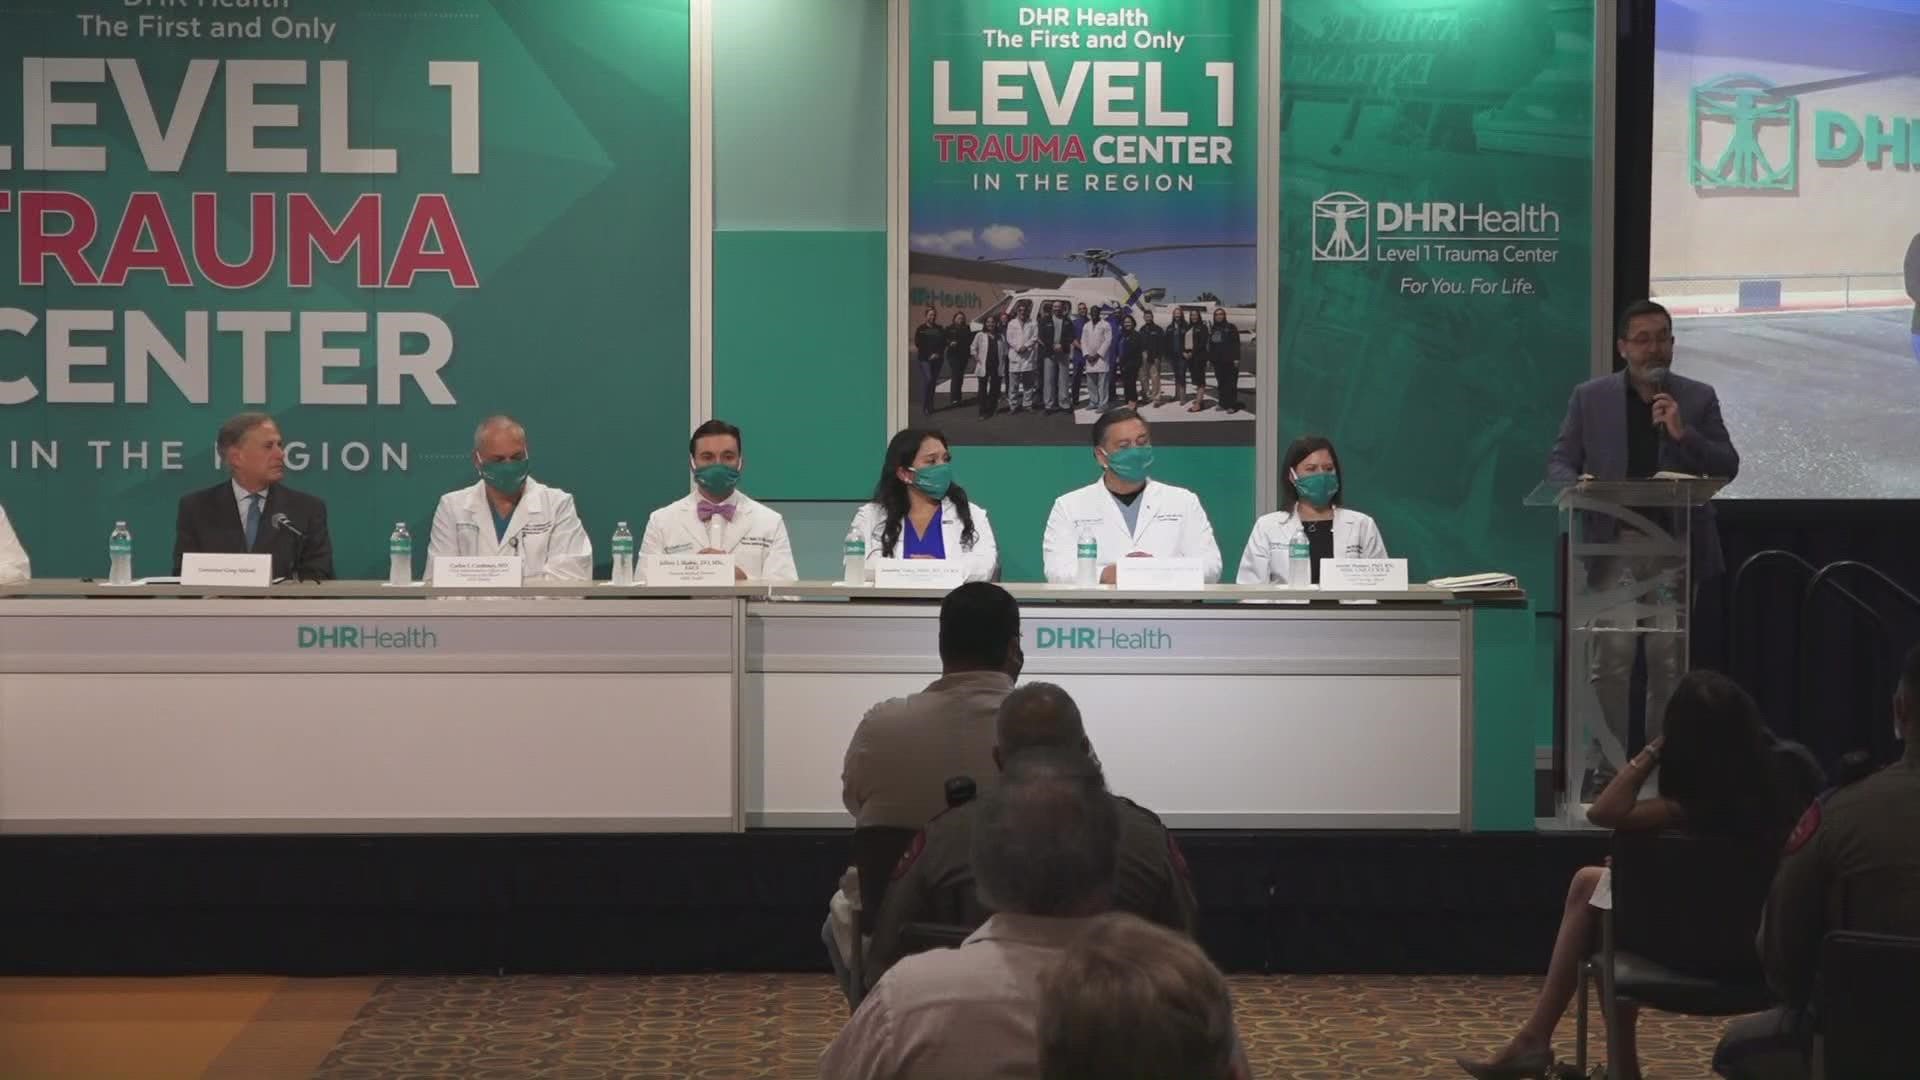 The press conference also focused on the Doctors Hospital at Renaissance officially be designated as a Level 1 Trauma Center.